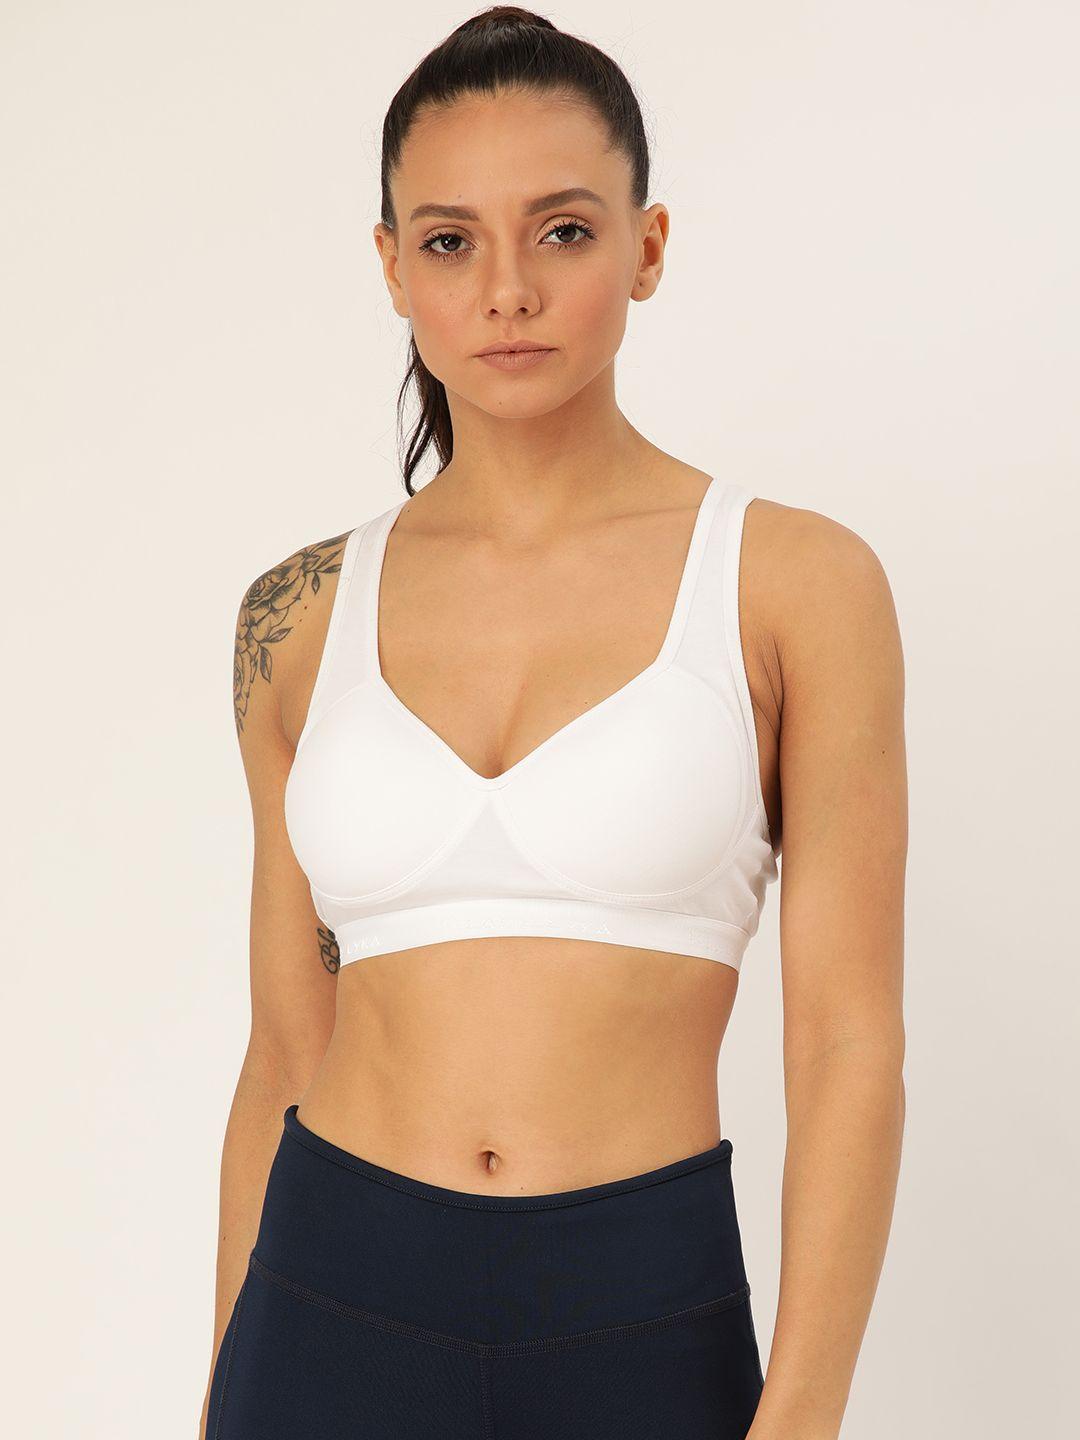 lady lyka white solid non-wired lightly padded sports bra provogue